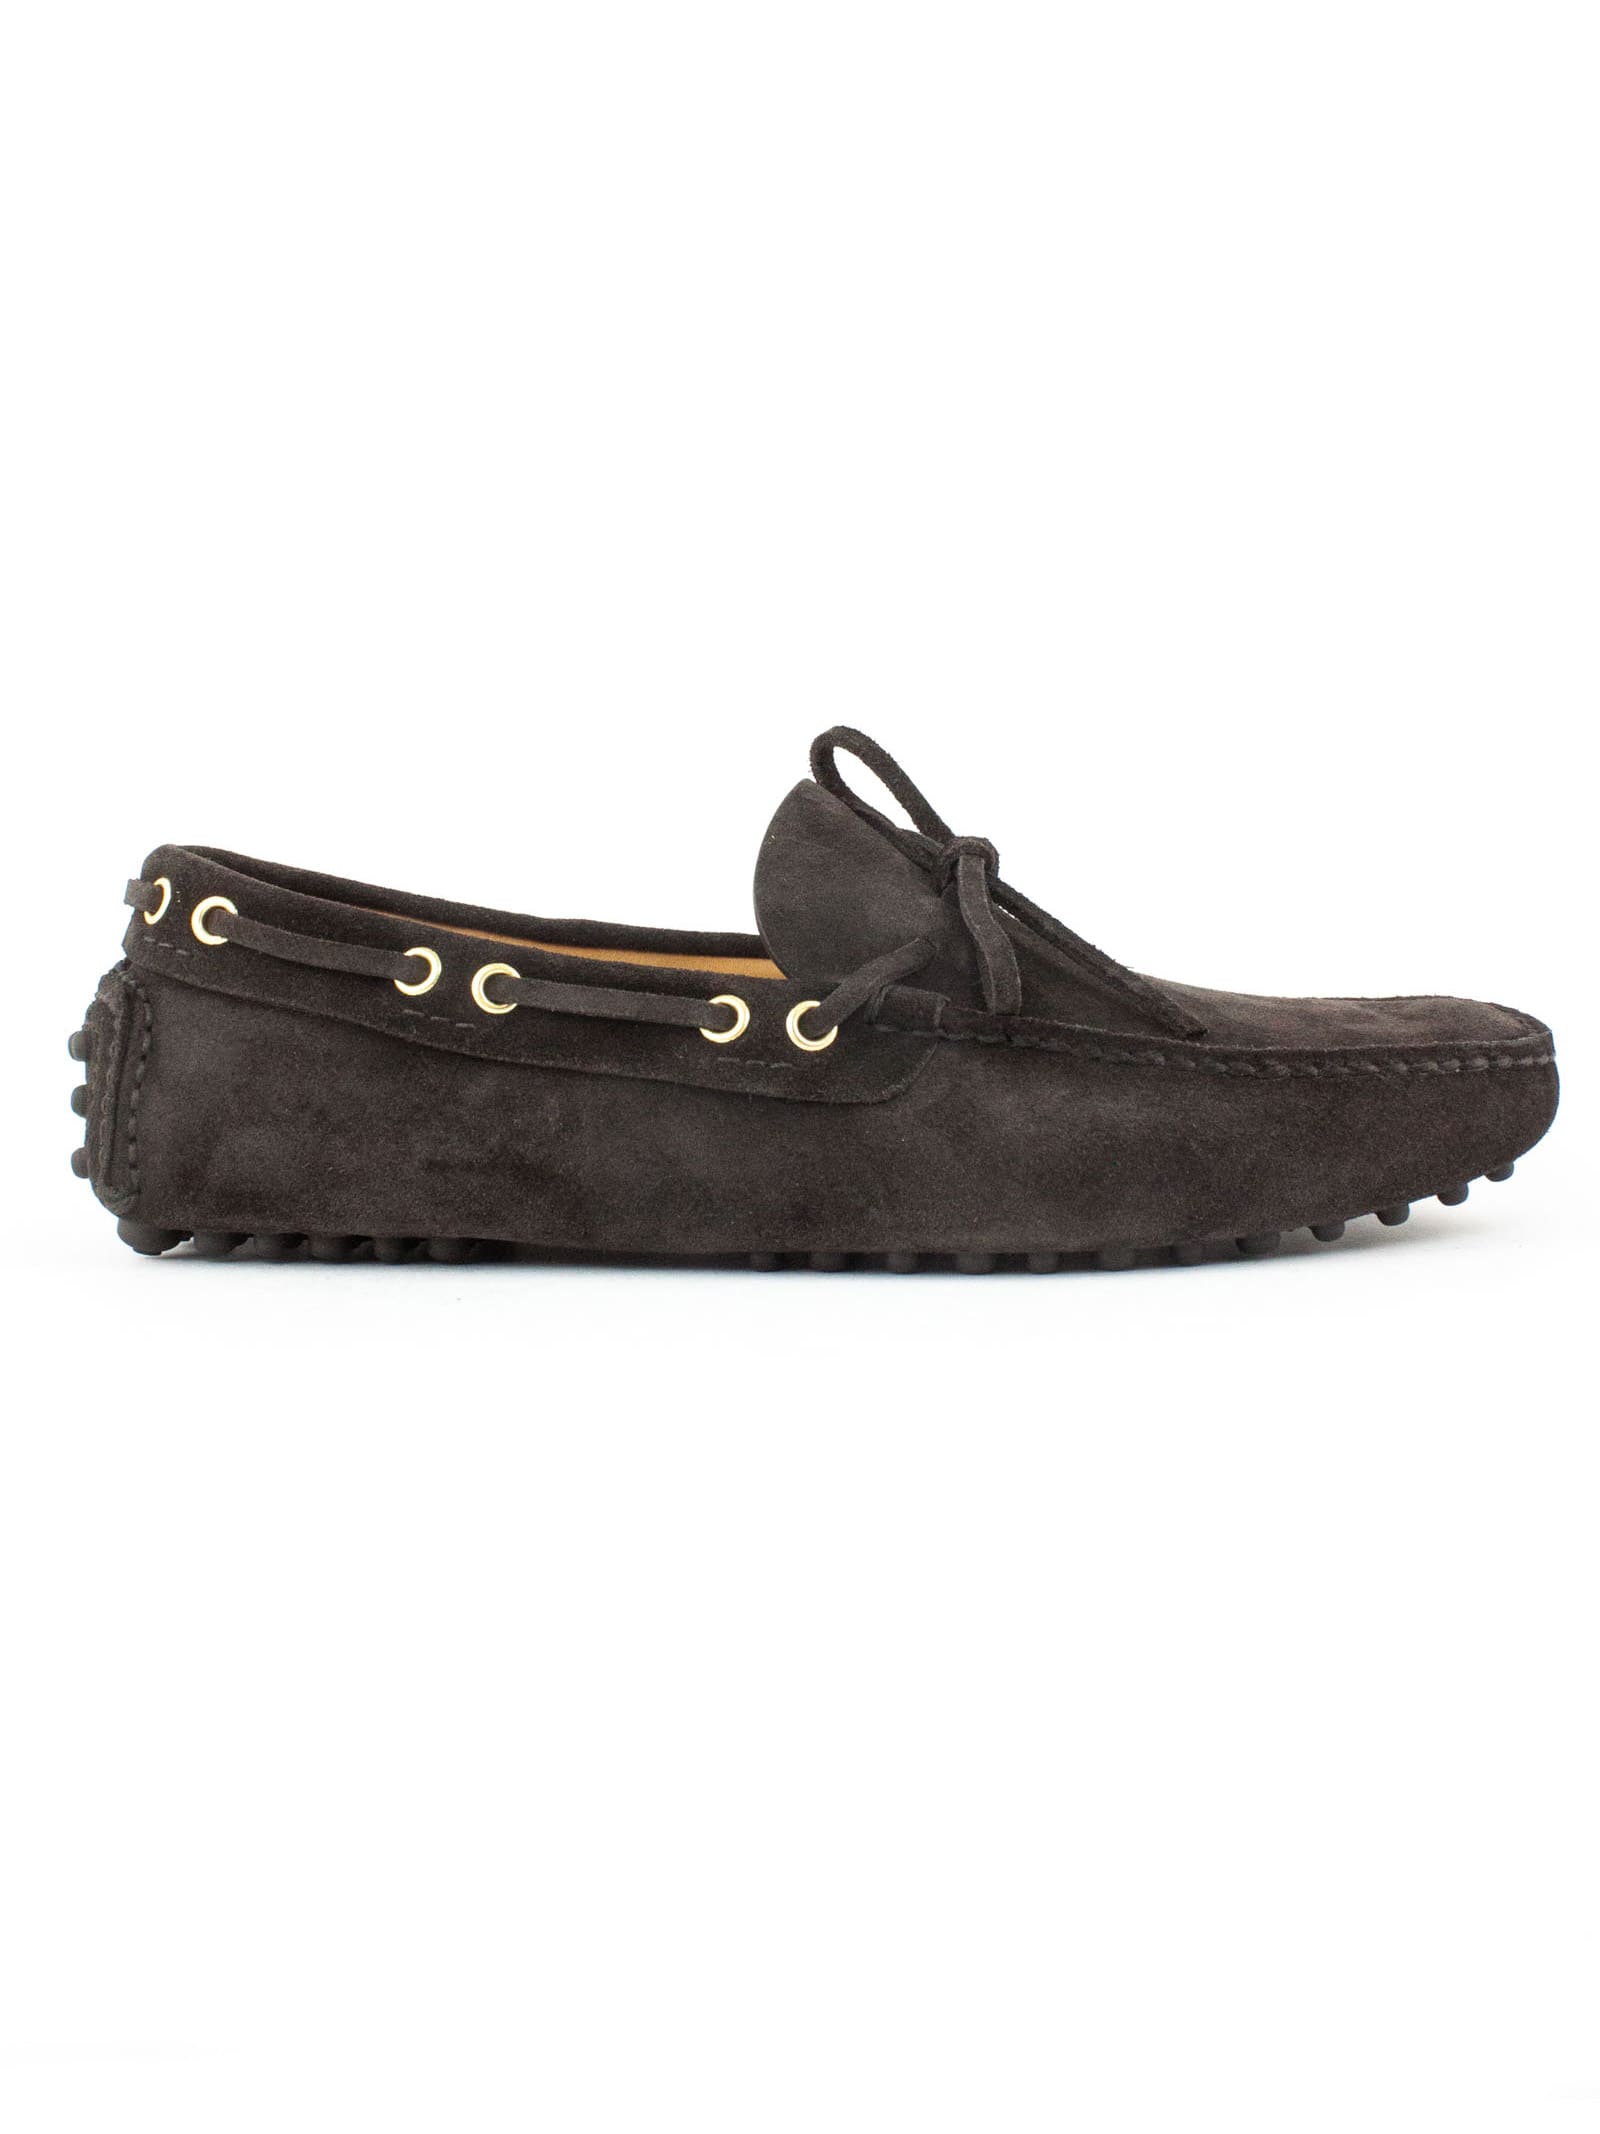 Car Shoe Driver Loafer In Brown Suede